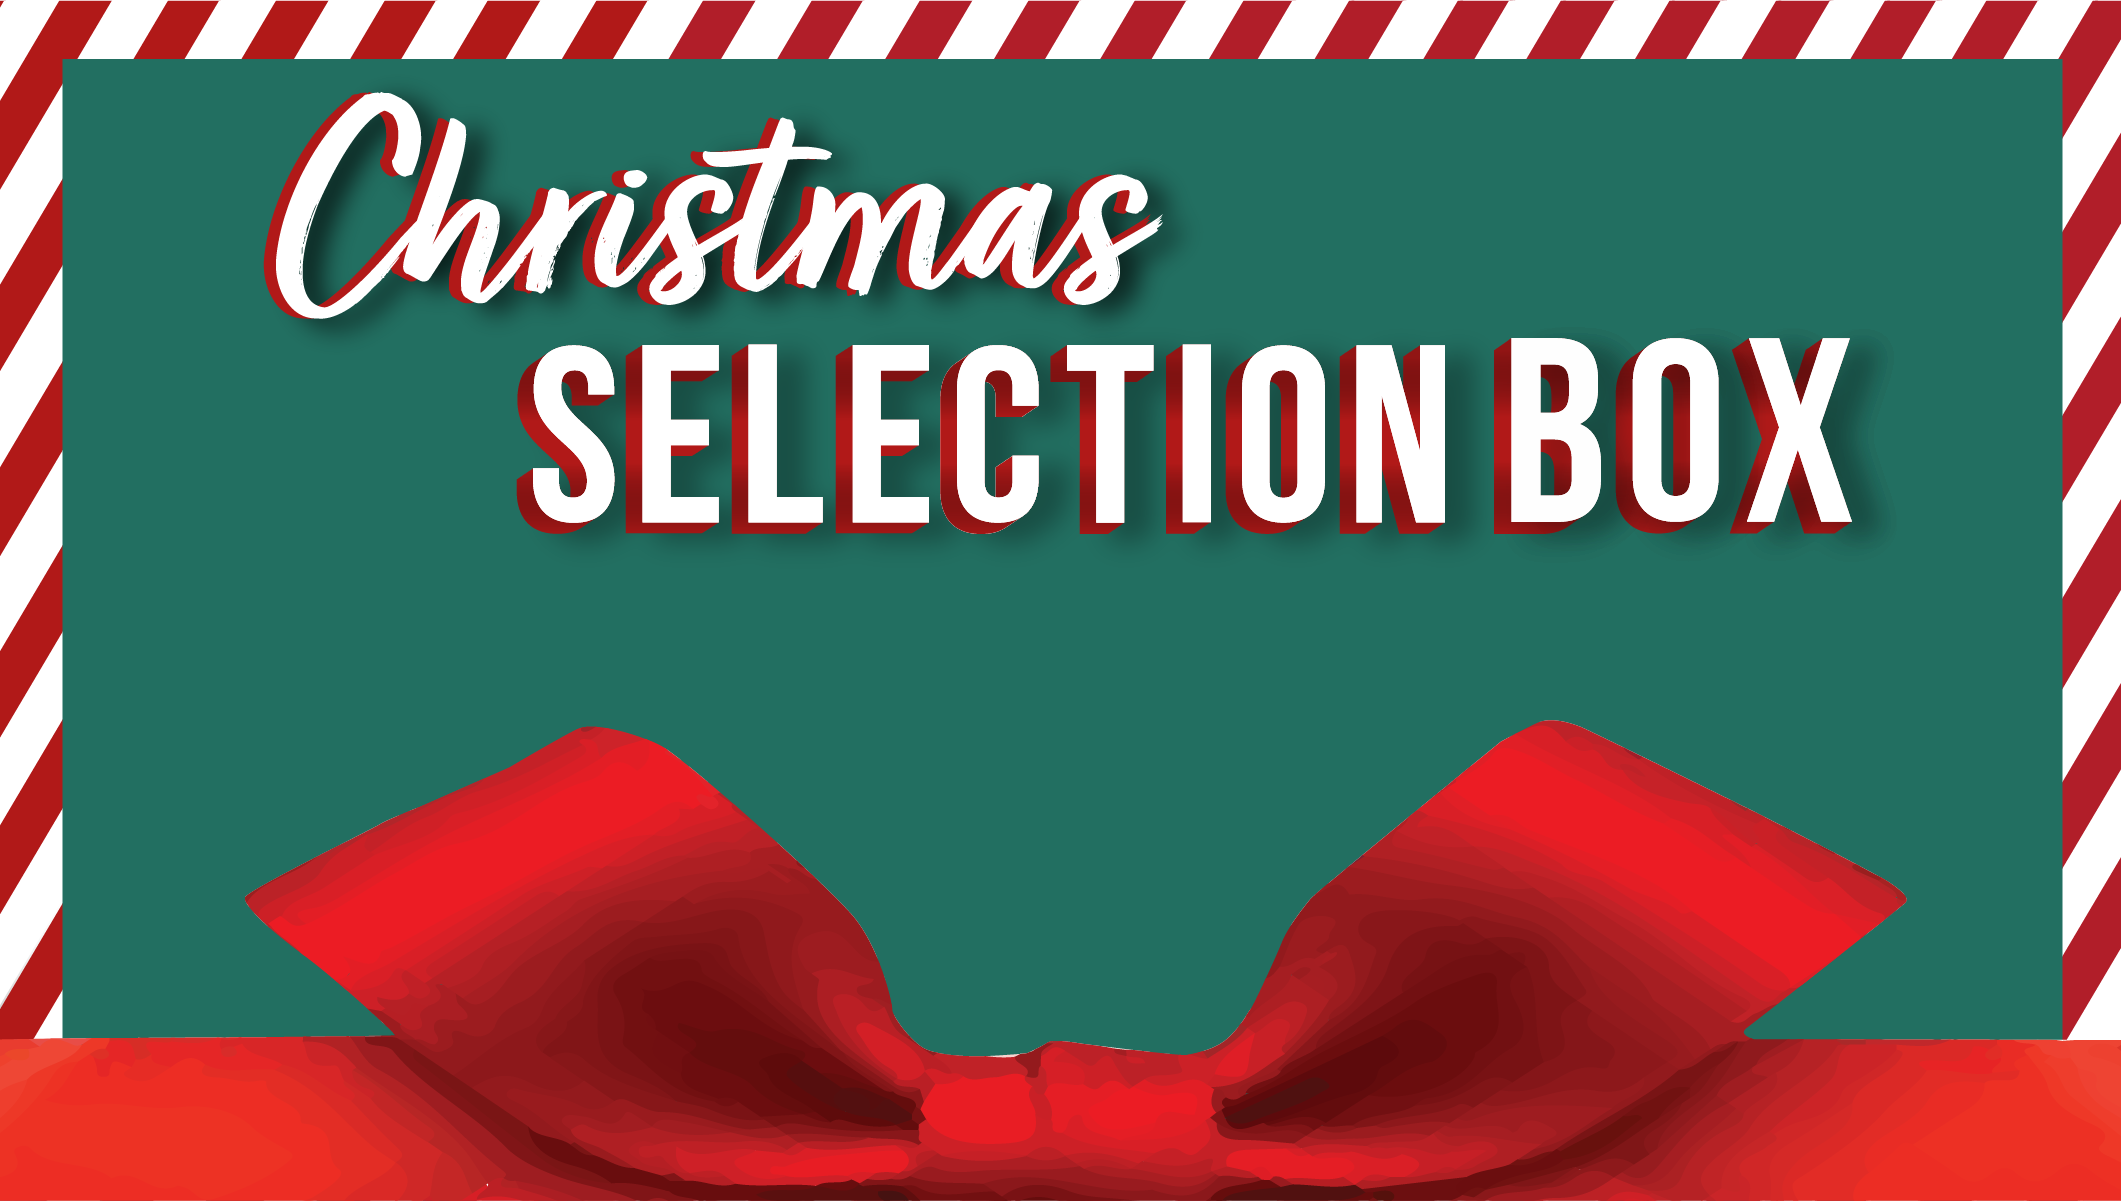 Make It One HECK Of A Christmas With Our Selection Box Bundle!